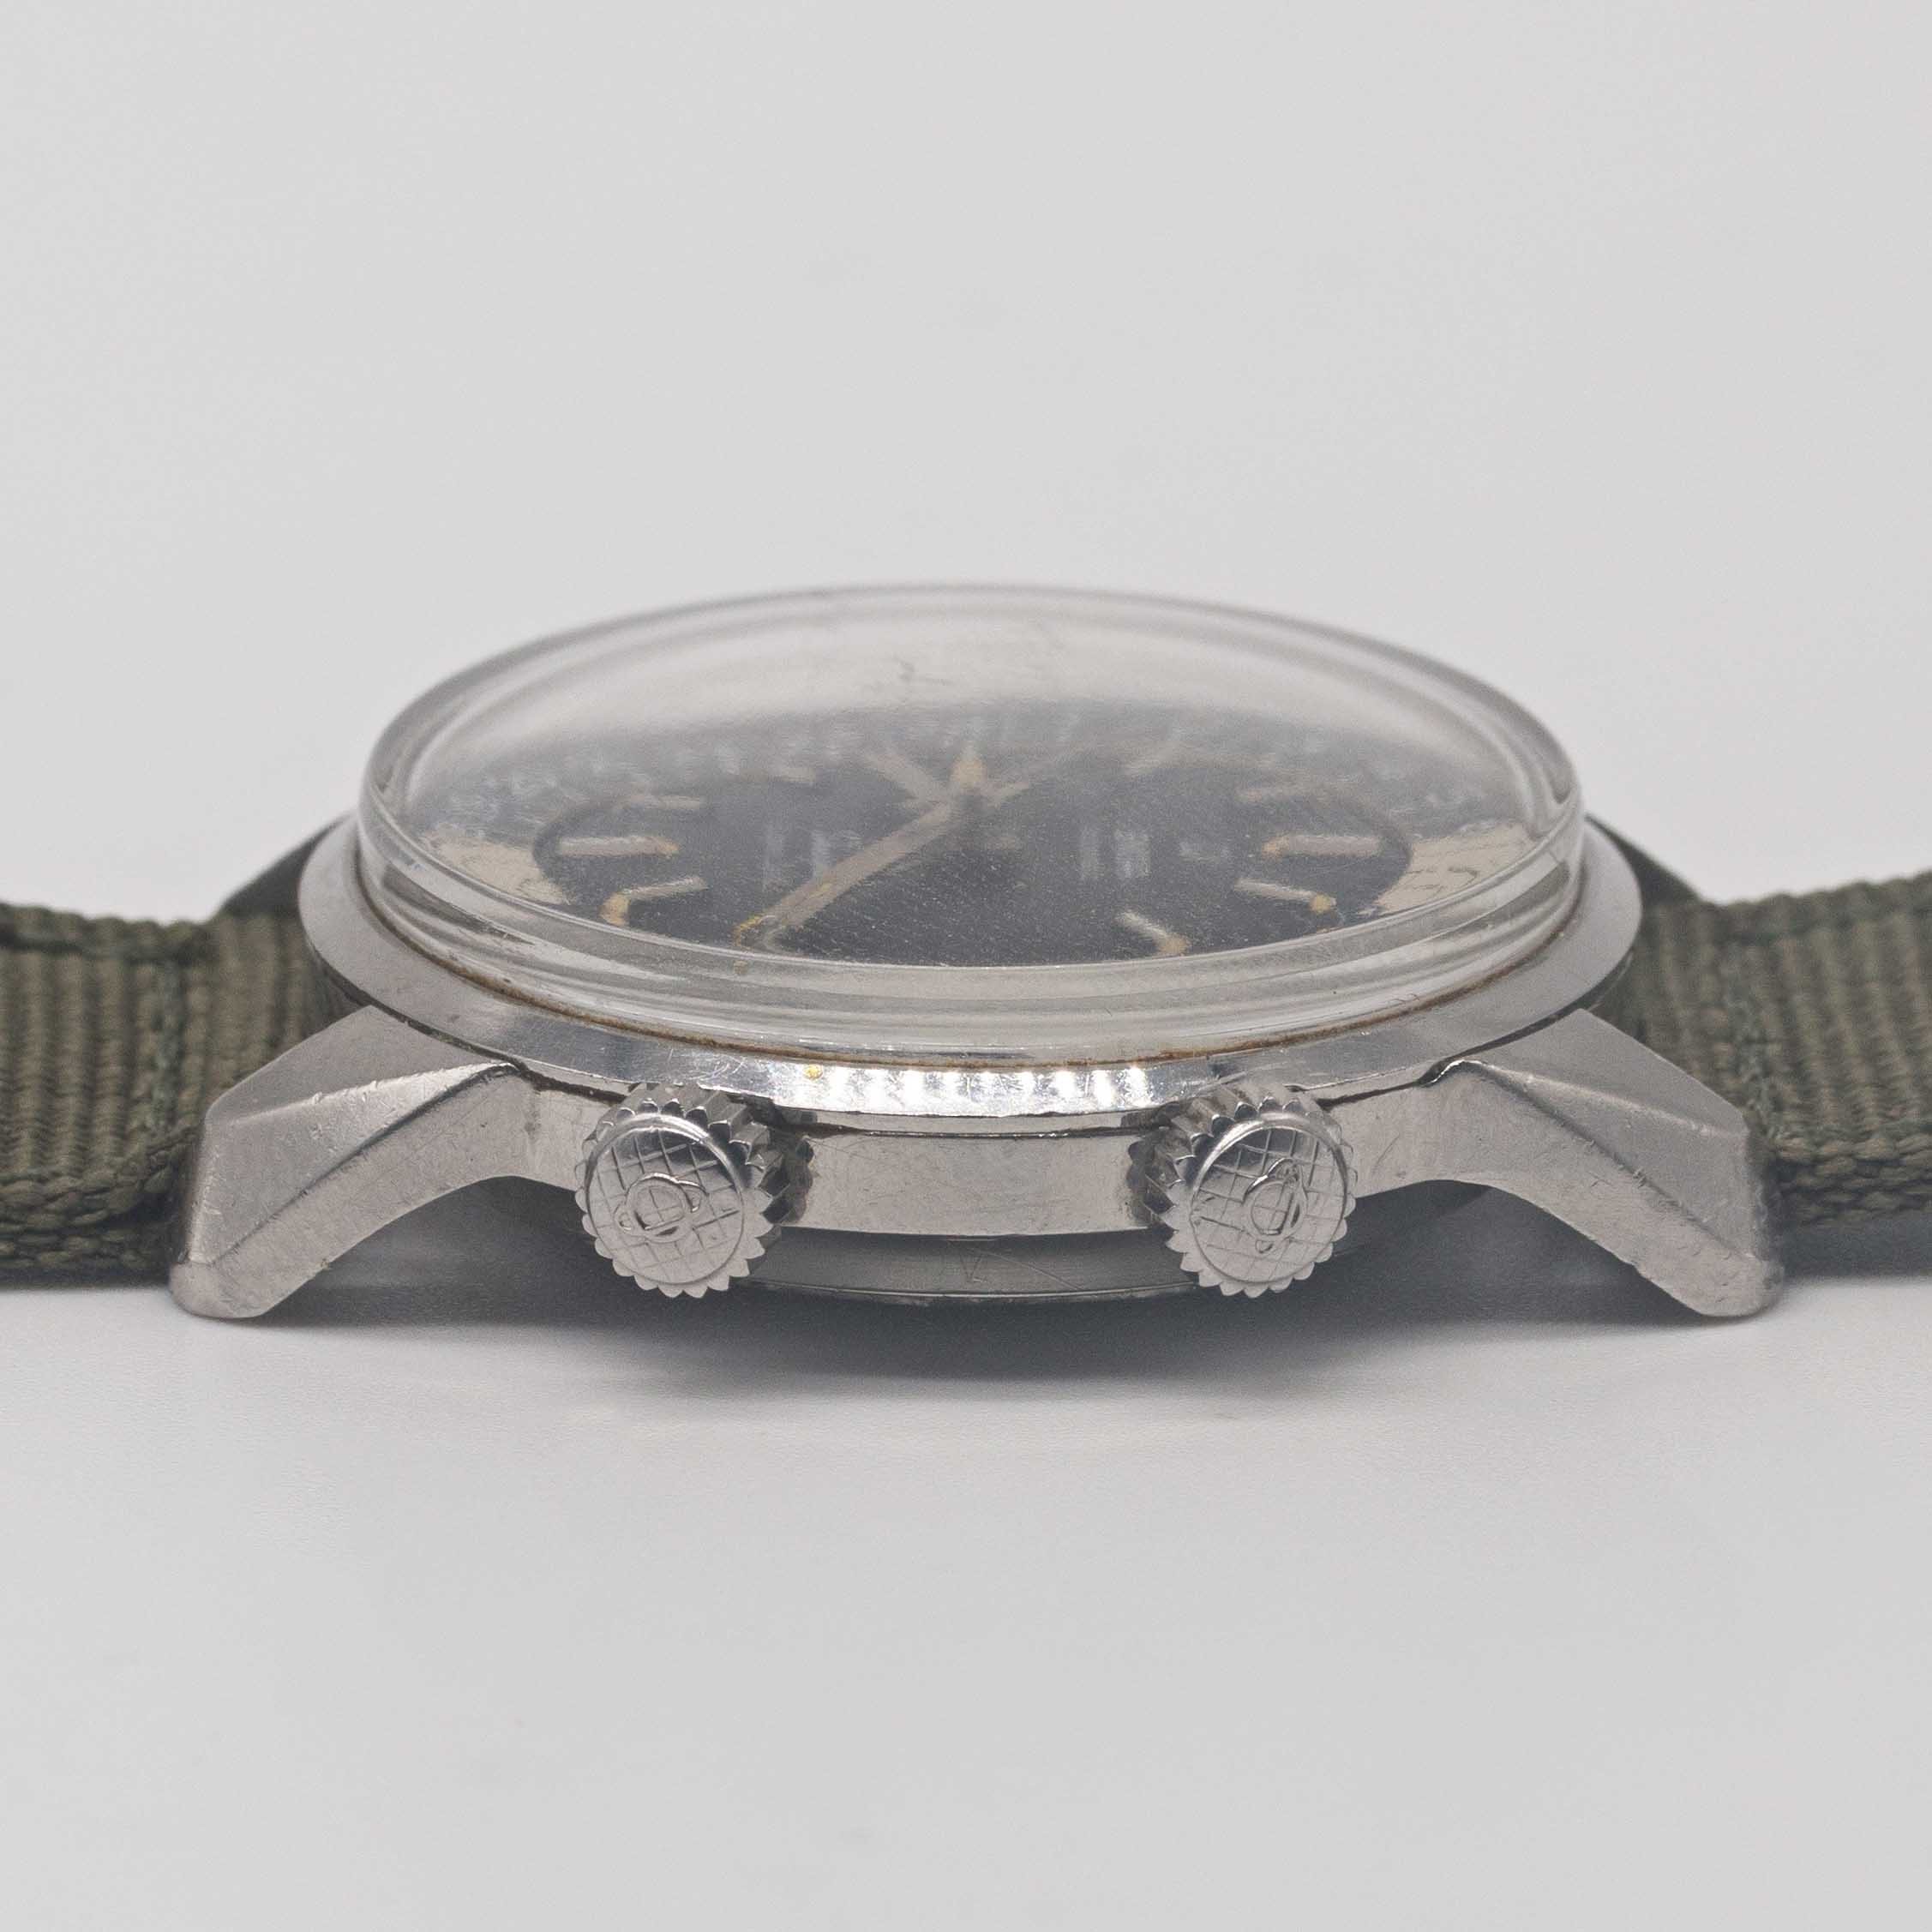 A GENTLEMAN'S STAINLESS STEEL ENICAR SHERPA SUPER JET GMT WRIST WATCH CIRCA 1960s, REF. 146/003 WITH - Image 7 of 8